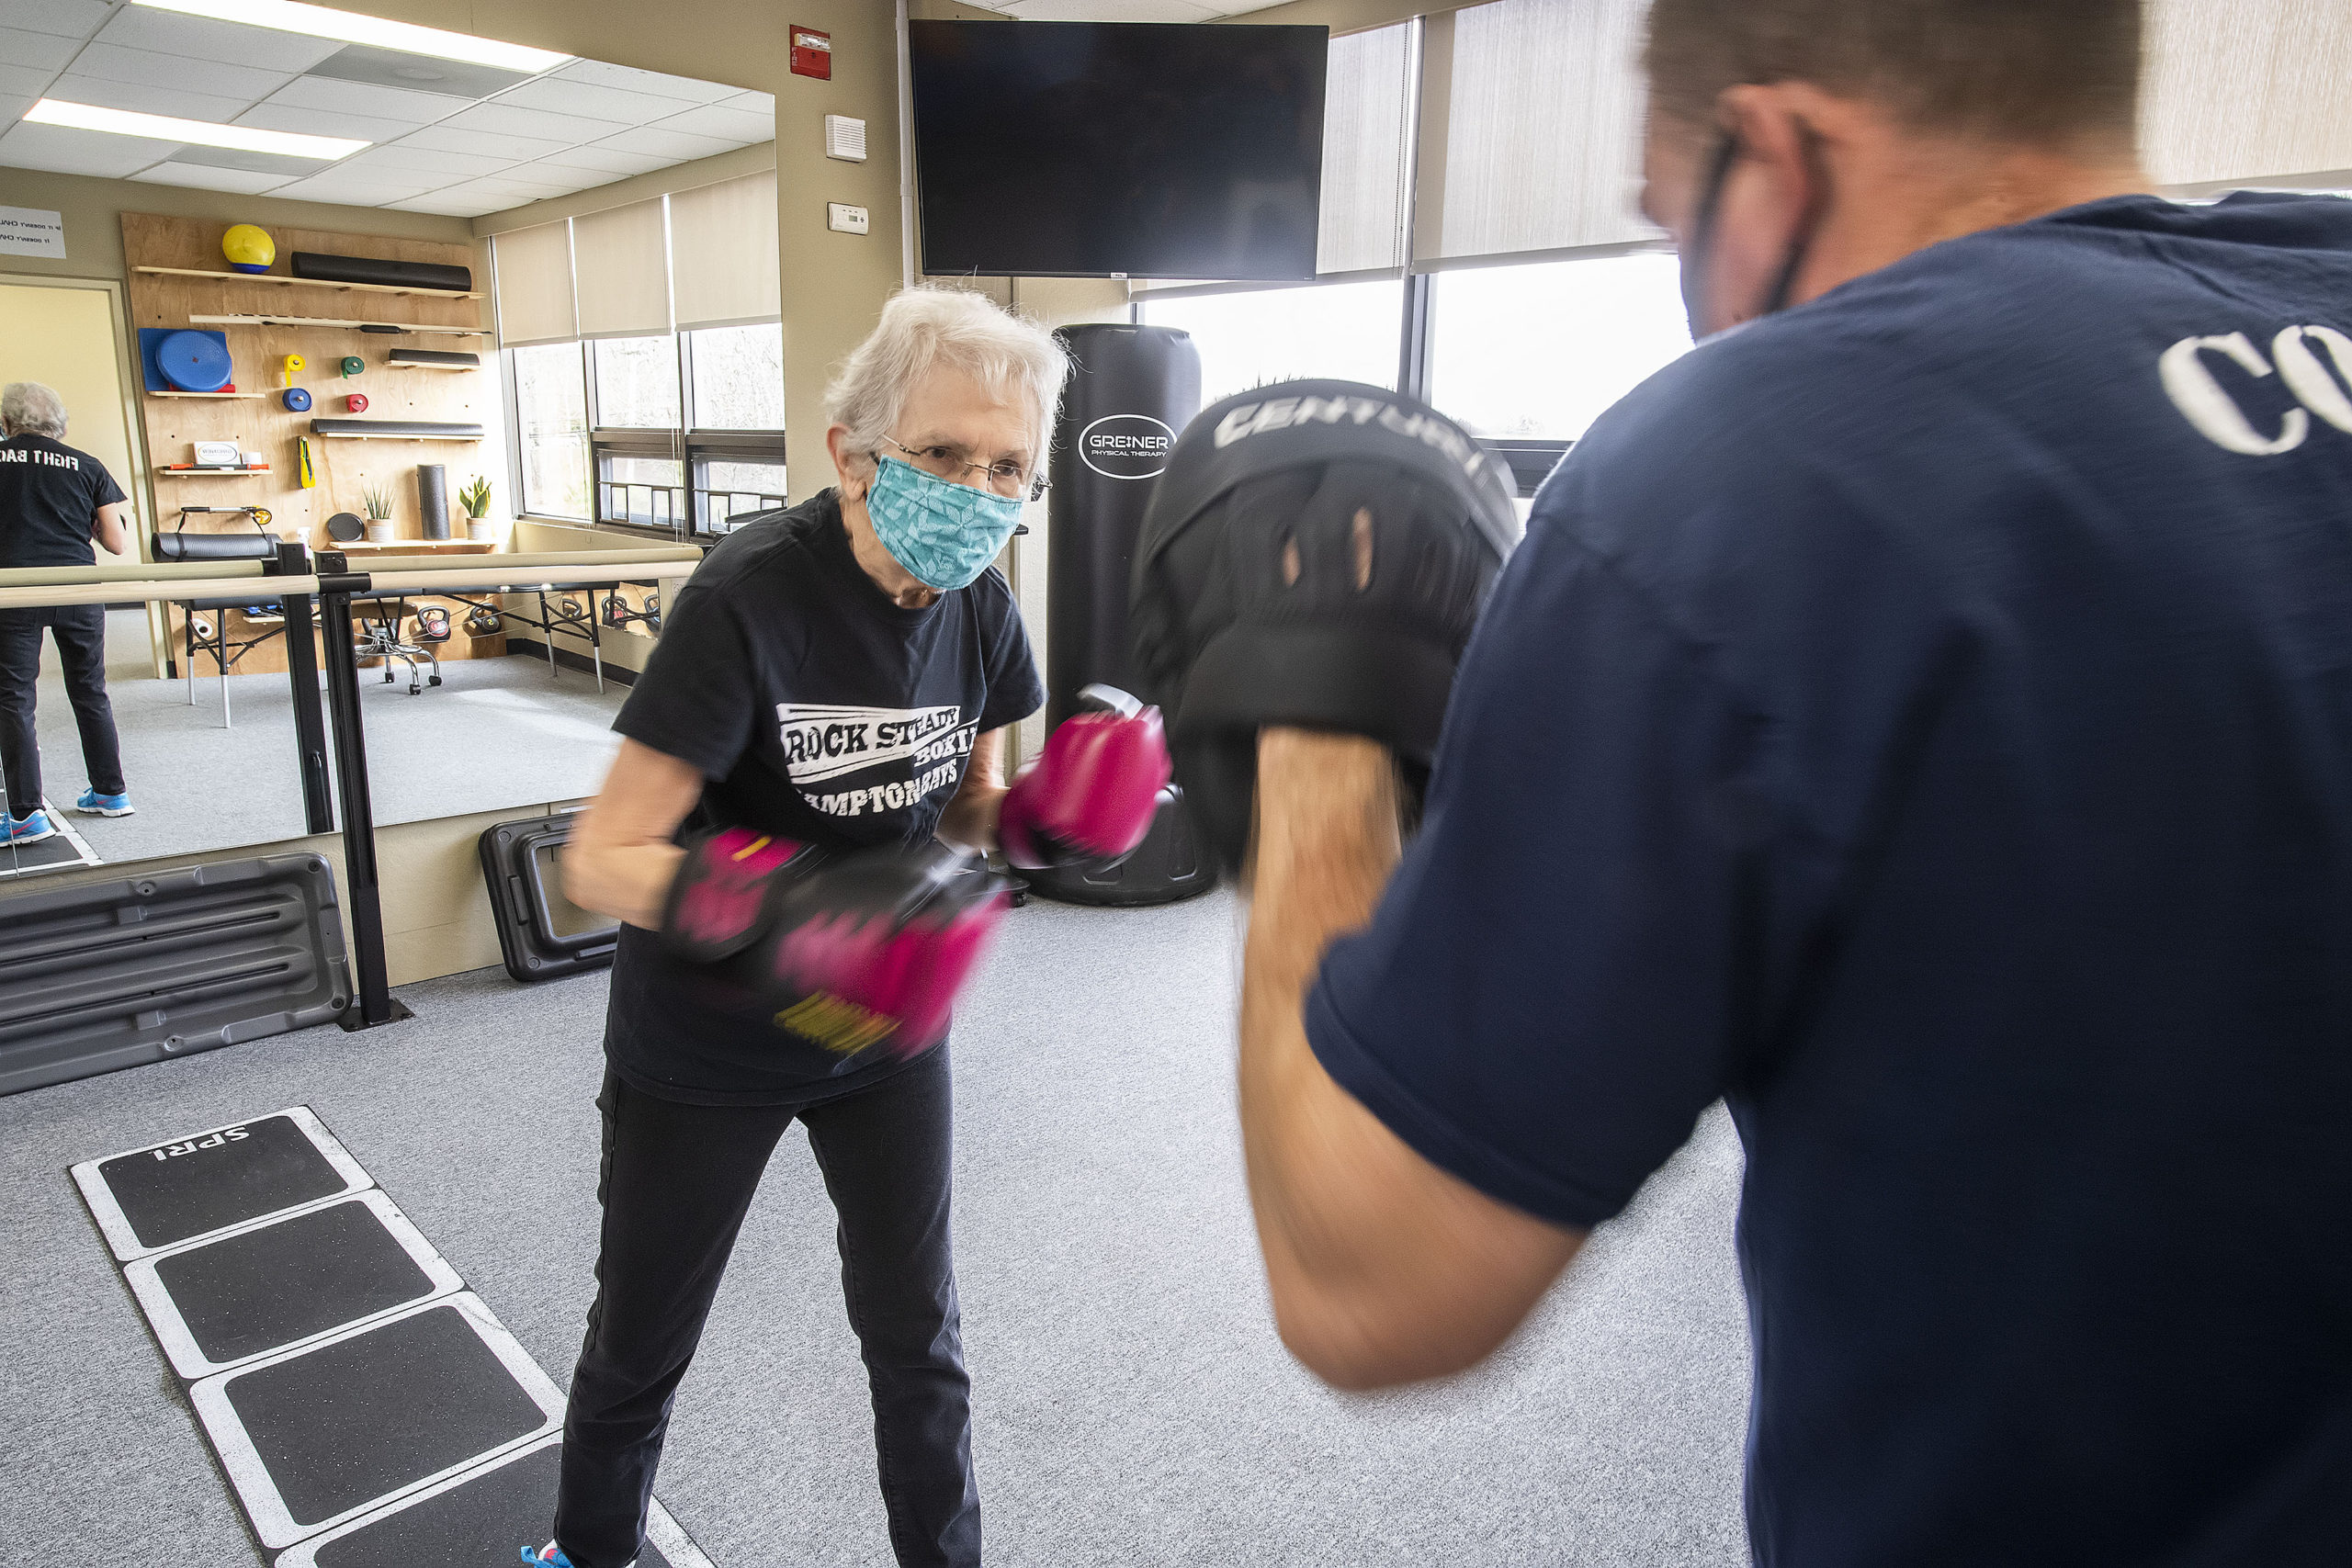 Seth Greiner of Greiner Physical Therapy does a Rock Steady Boxing workout with Parkinson's patient Janet Barr at the Greiner Physical Therapy studio in Speonk.